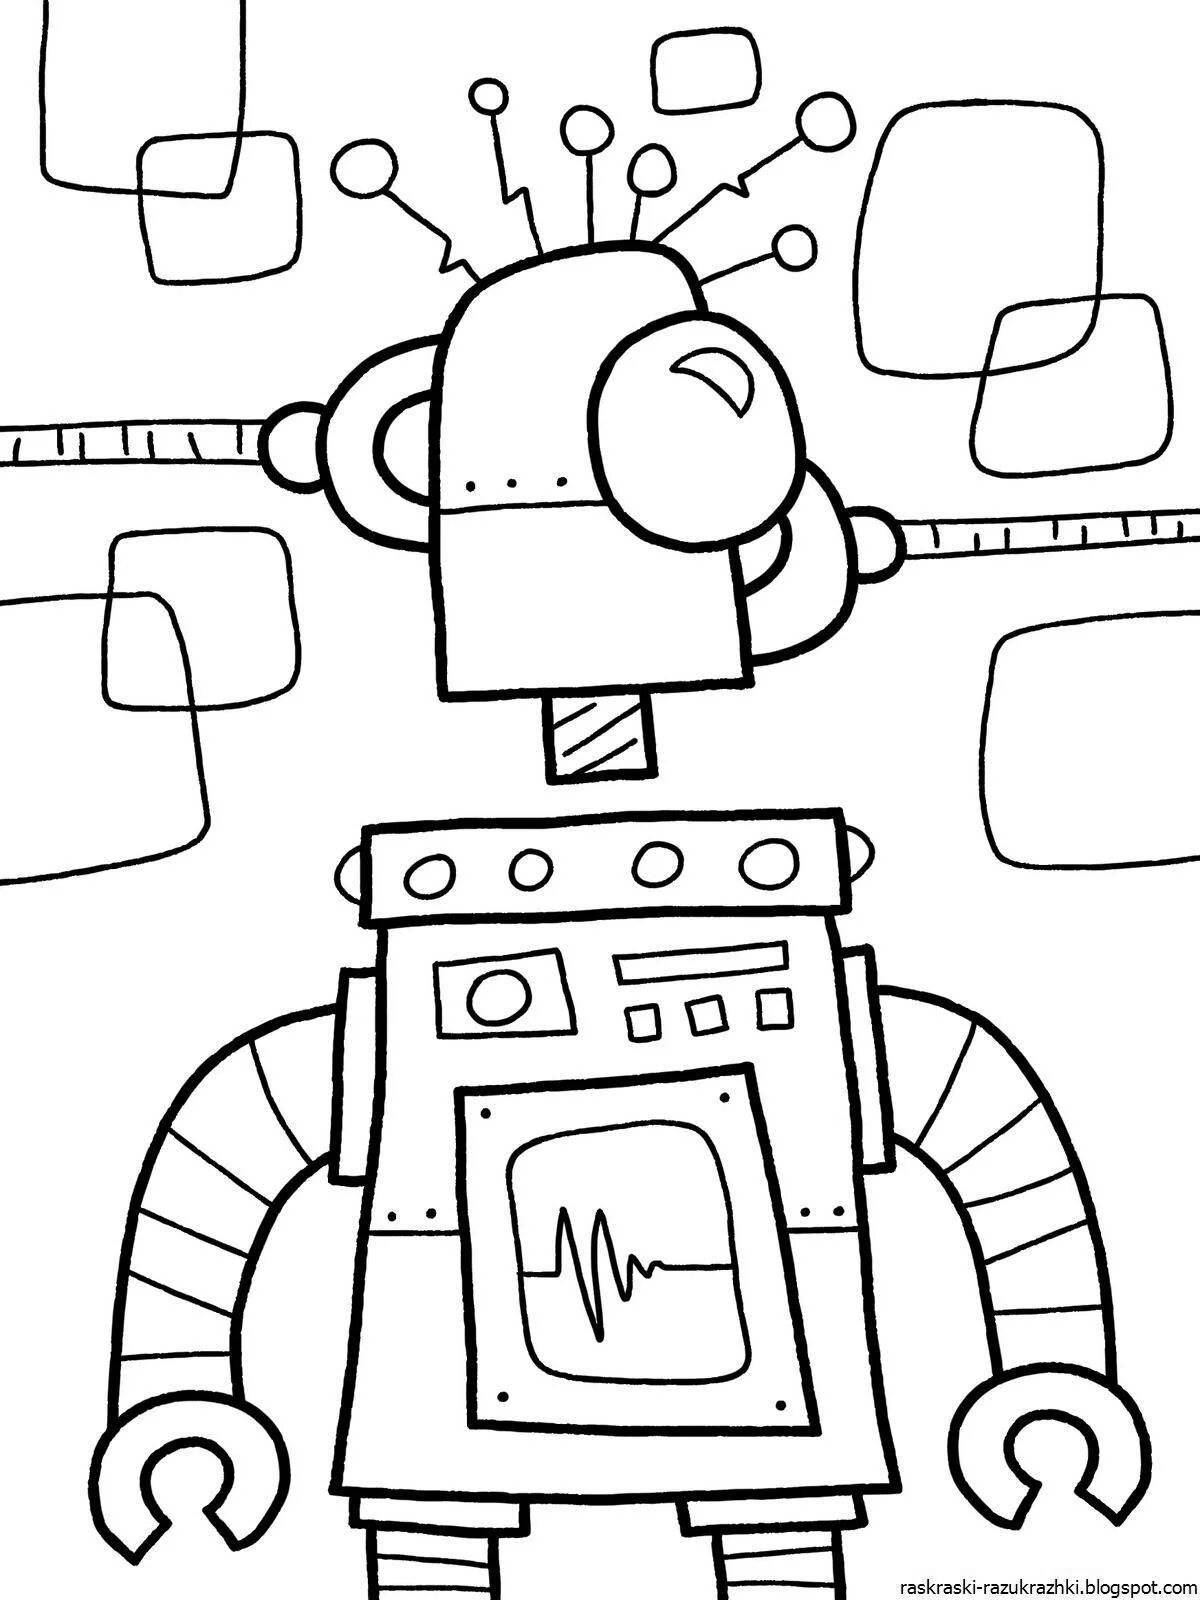 Incredible tobot coloring for kids